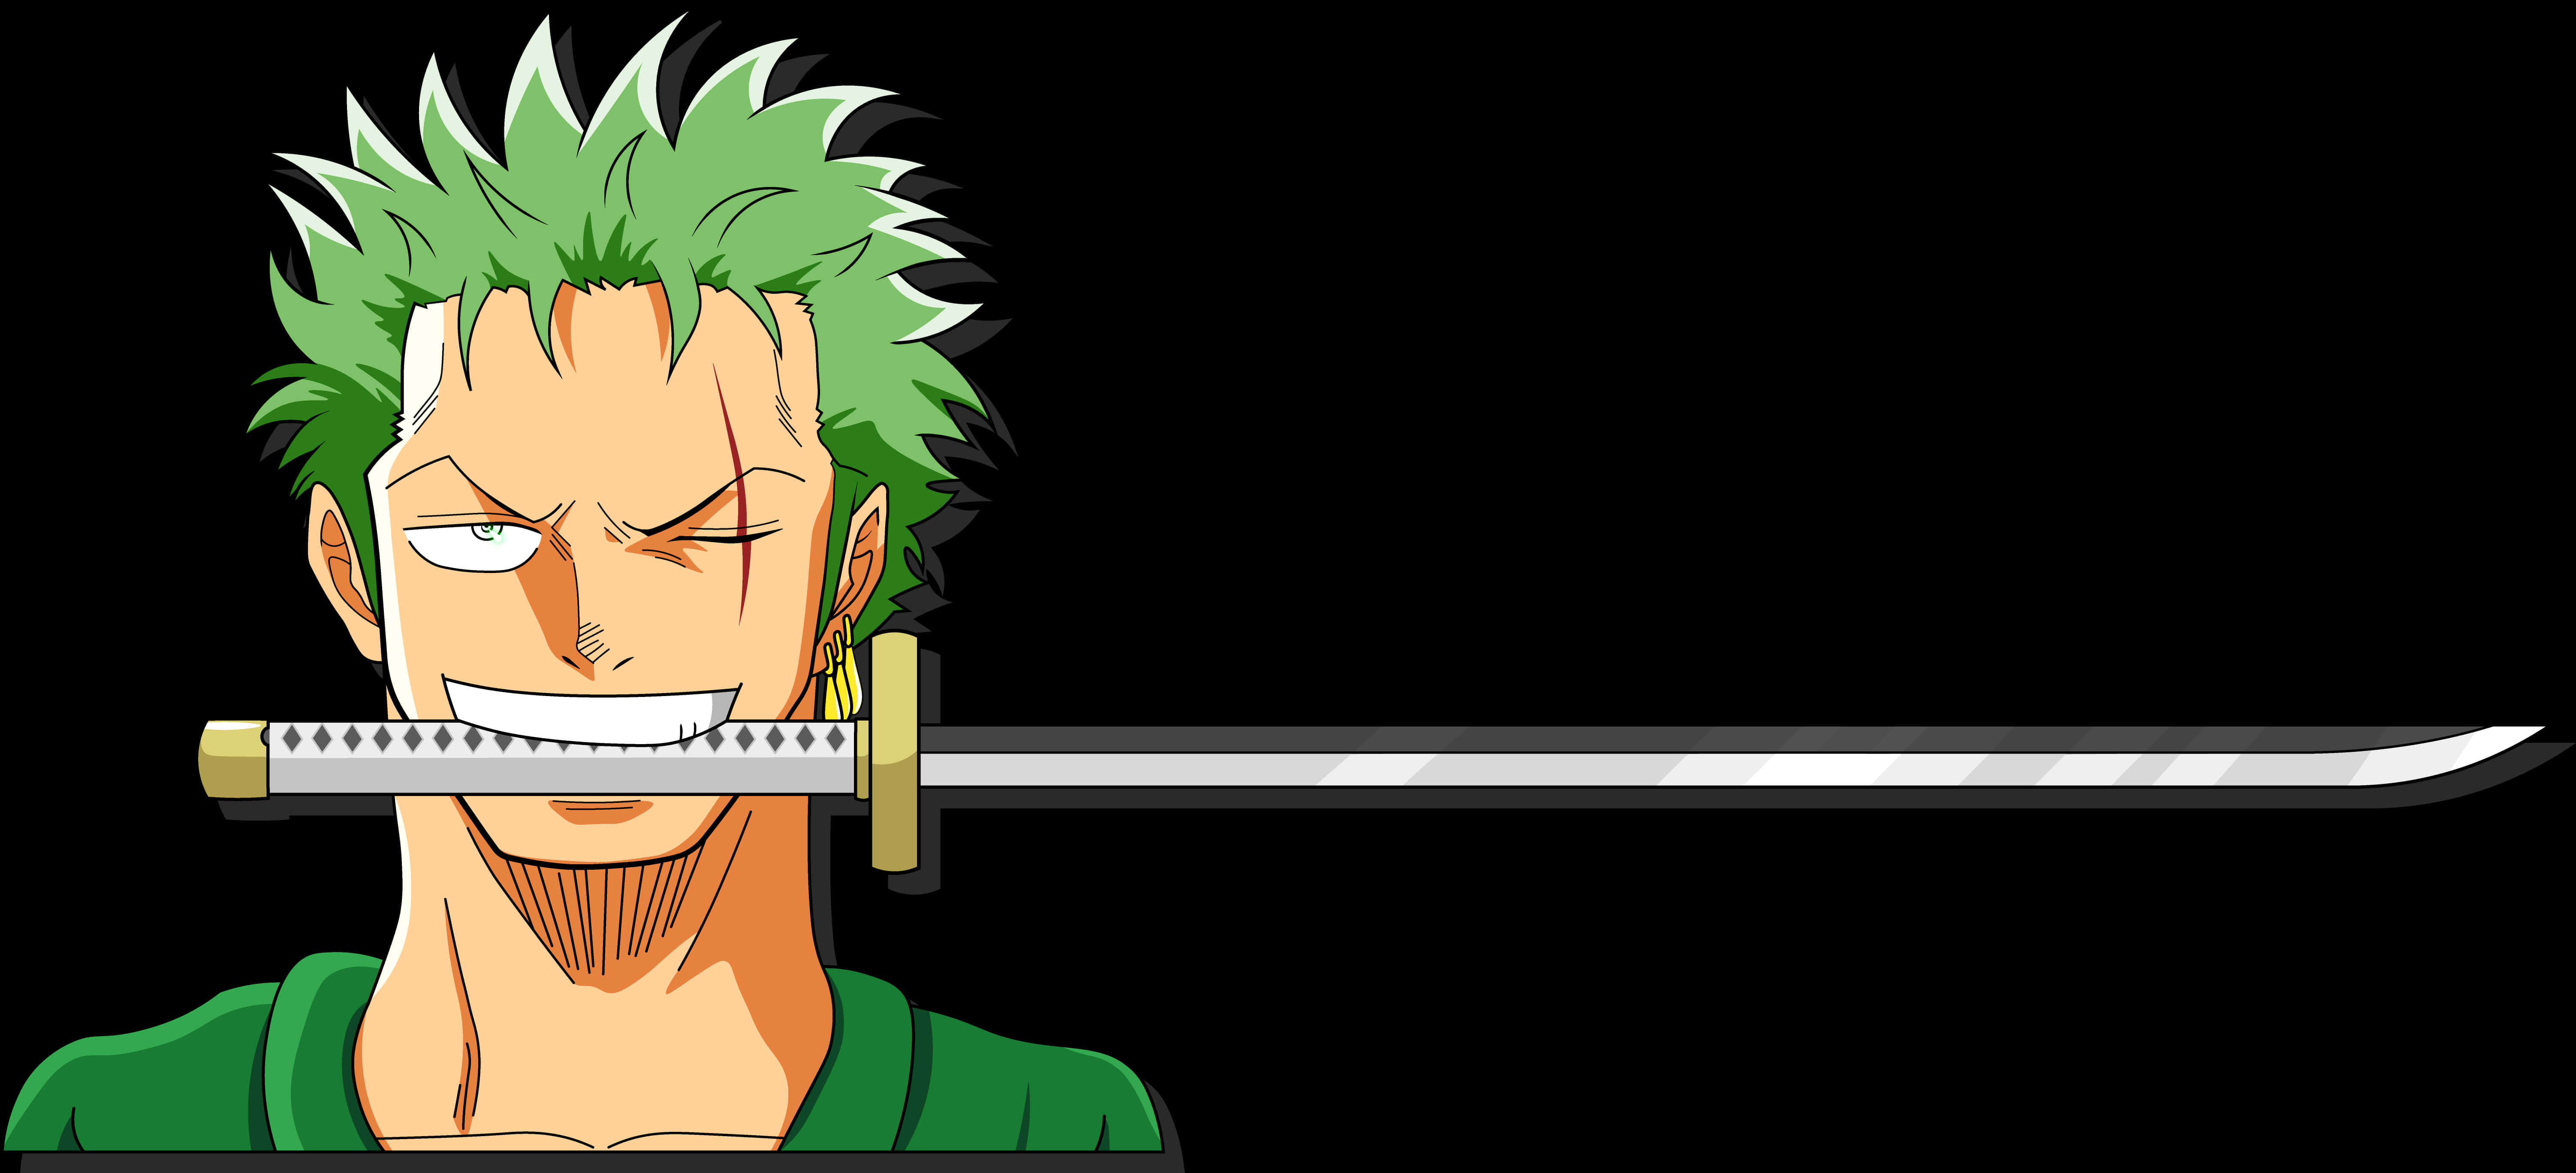 Zoro Swordin Mouth One Piece Character